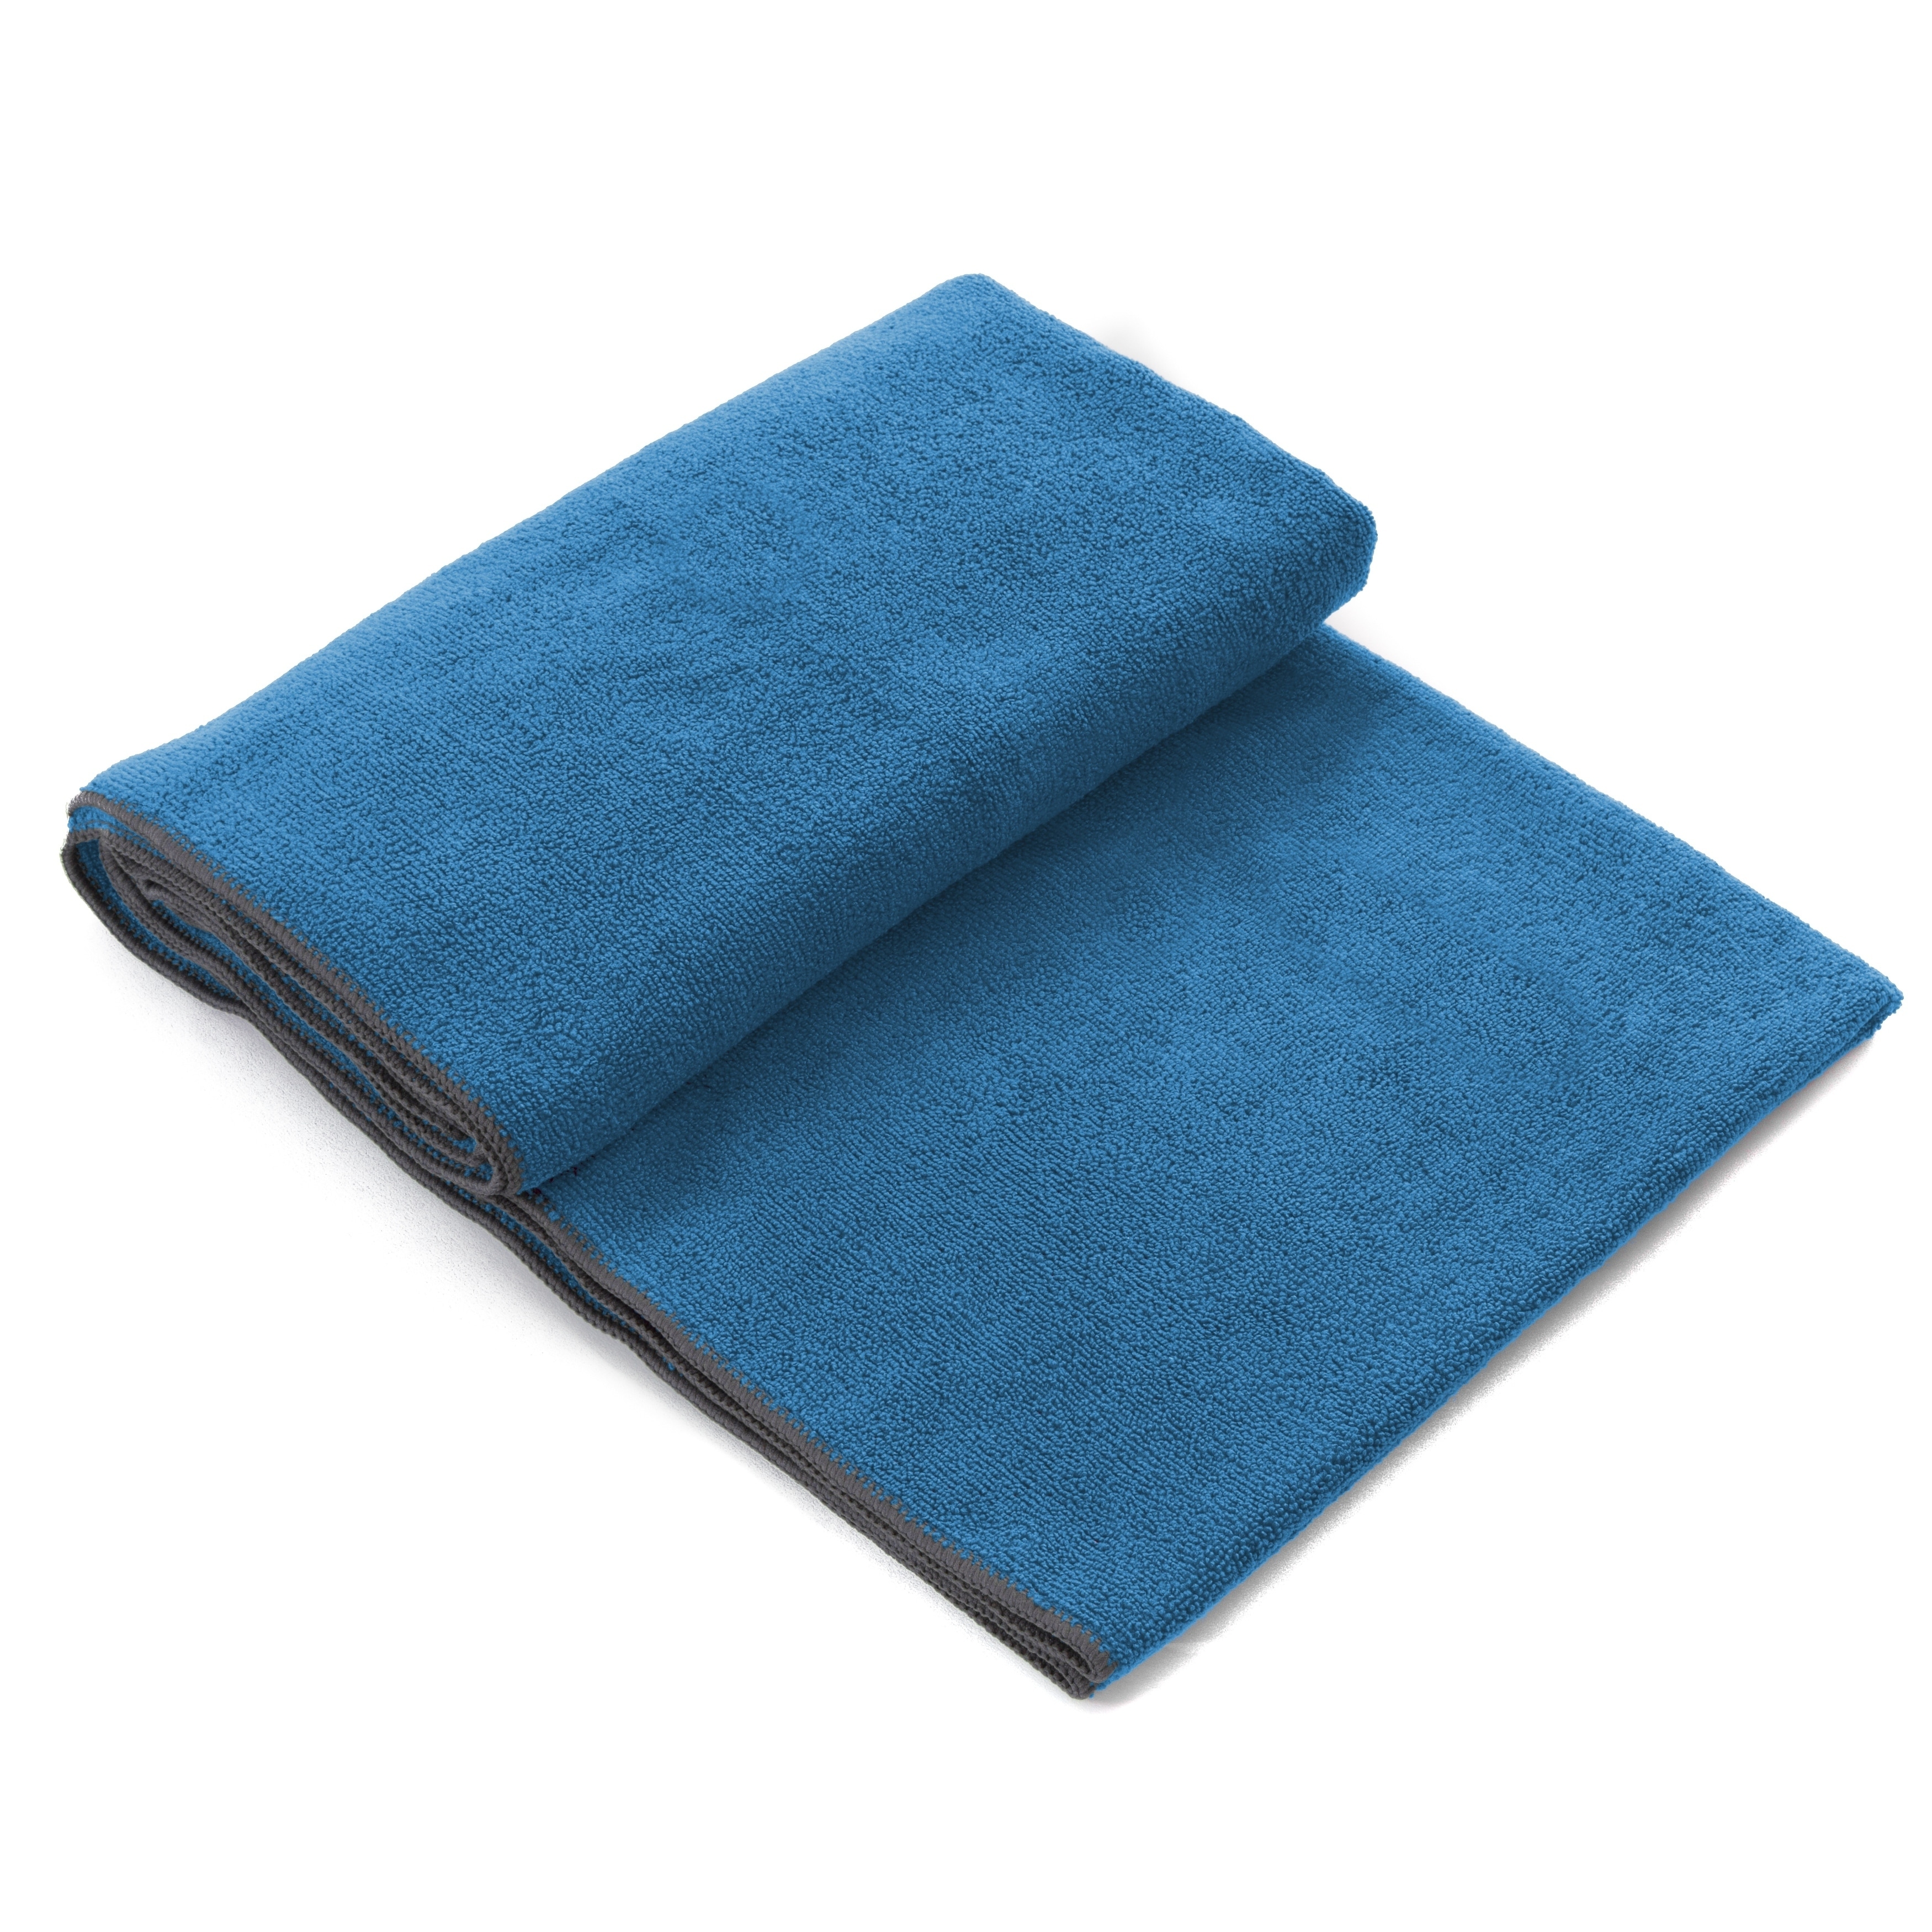 Microfiber Gym Towels For Sweat, Yoga Sweat Towel For Home Gym, Microfiber  Workout Towels For Gym, 13 Inch X 29 Inch, 3 Pack